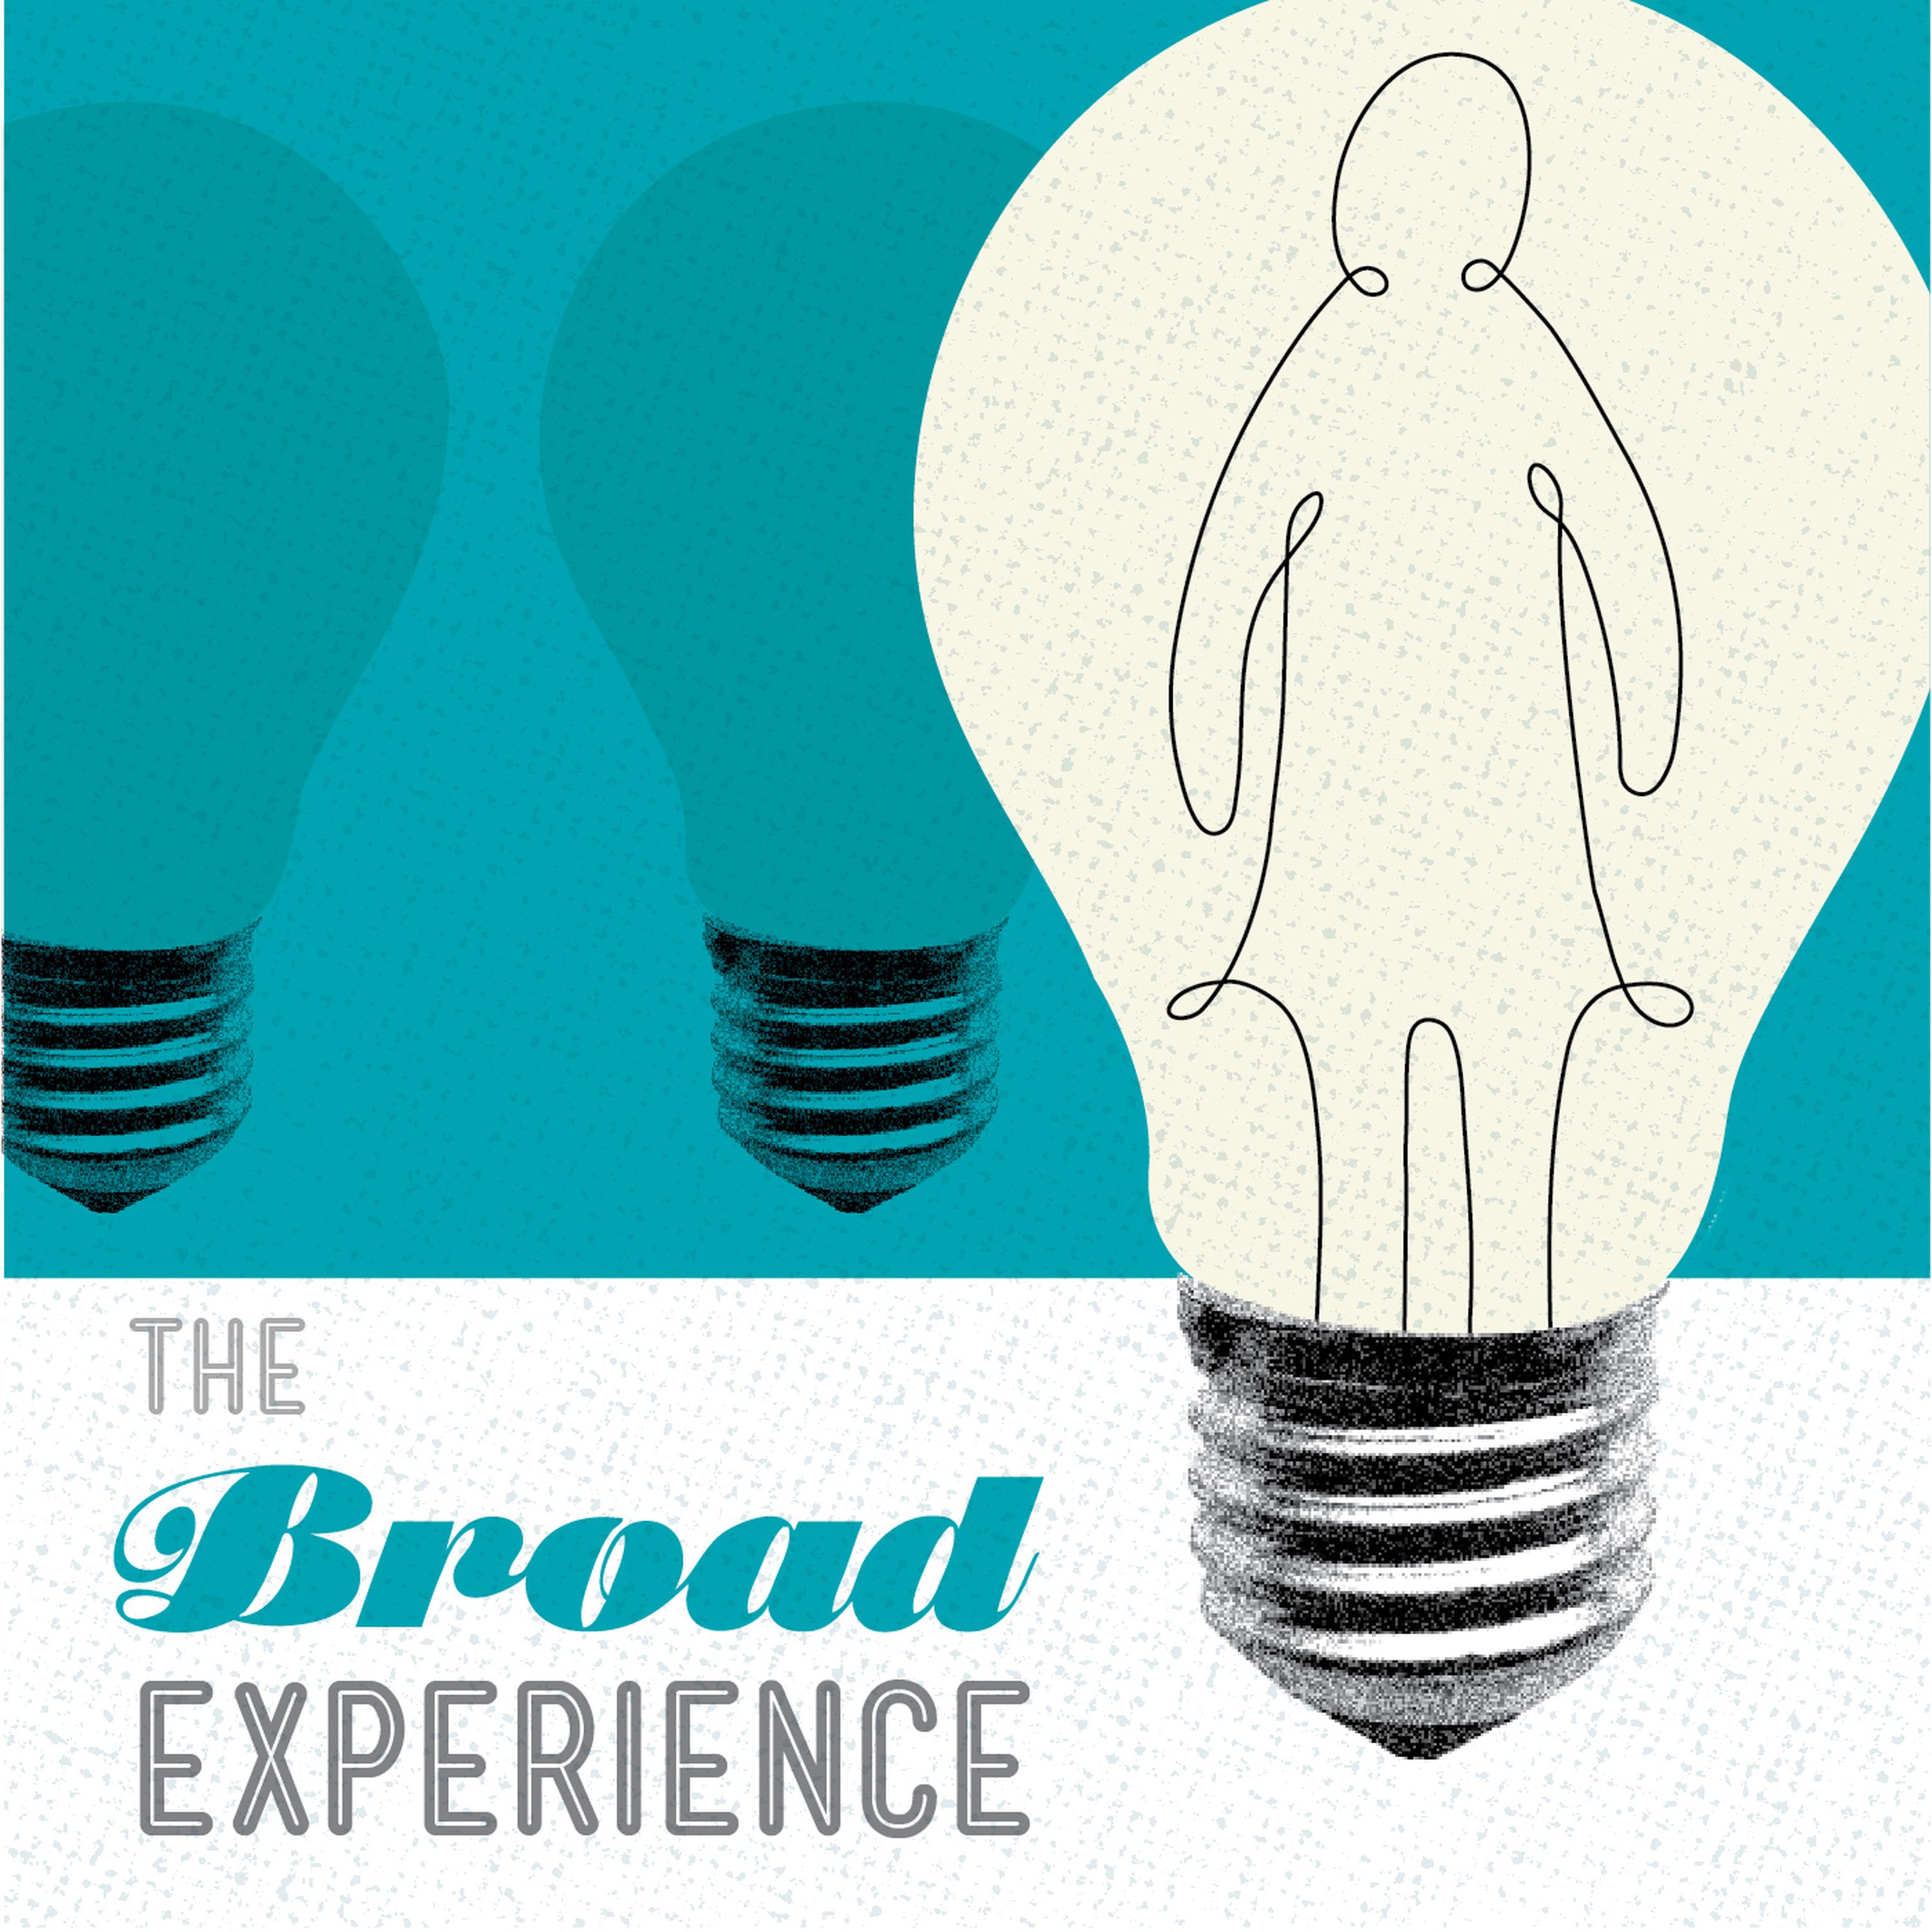 The Broad Experience 40: The hell of networking